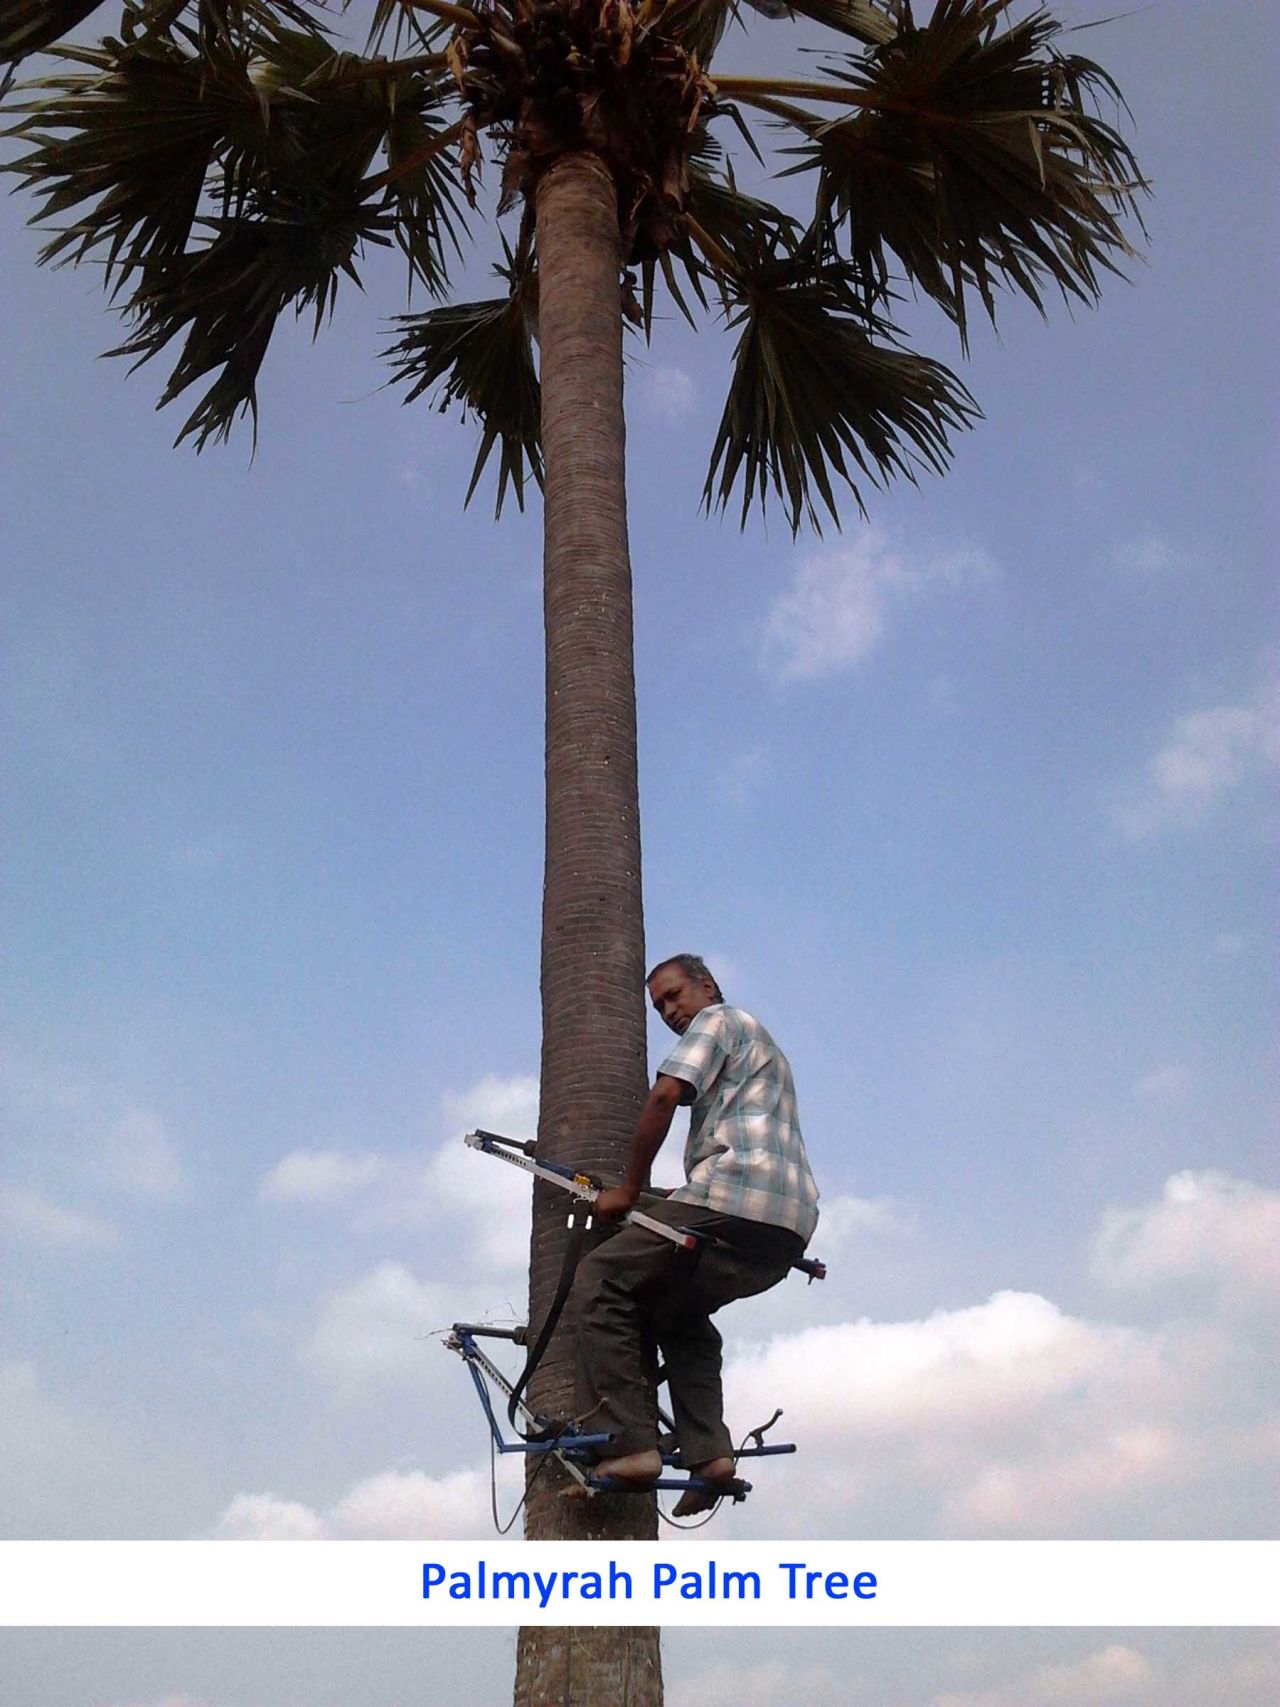 D. Renganathan developed a mechanical tree climber which can be used for scaling palm and coconut trees. Climbing trees for harvest is difficult and dangerous work -- the tree climber designed by Renganathan uses a 'four-lock pin' system to prevent falls. The device now sells across south Asia.